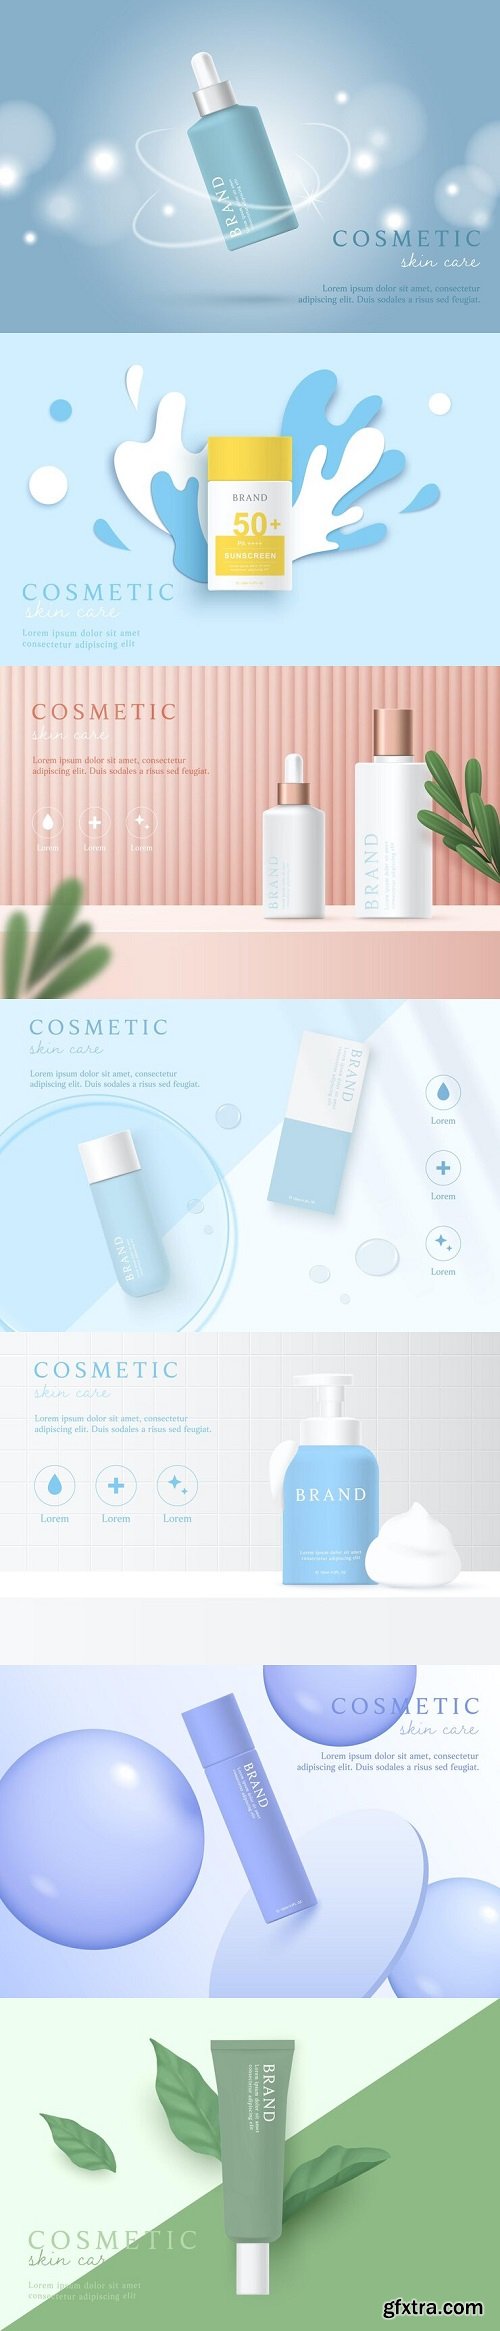 Cosmetics and skin care product ads template